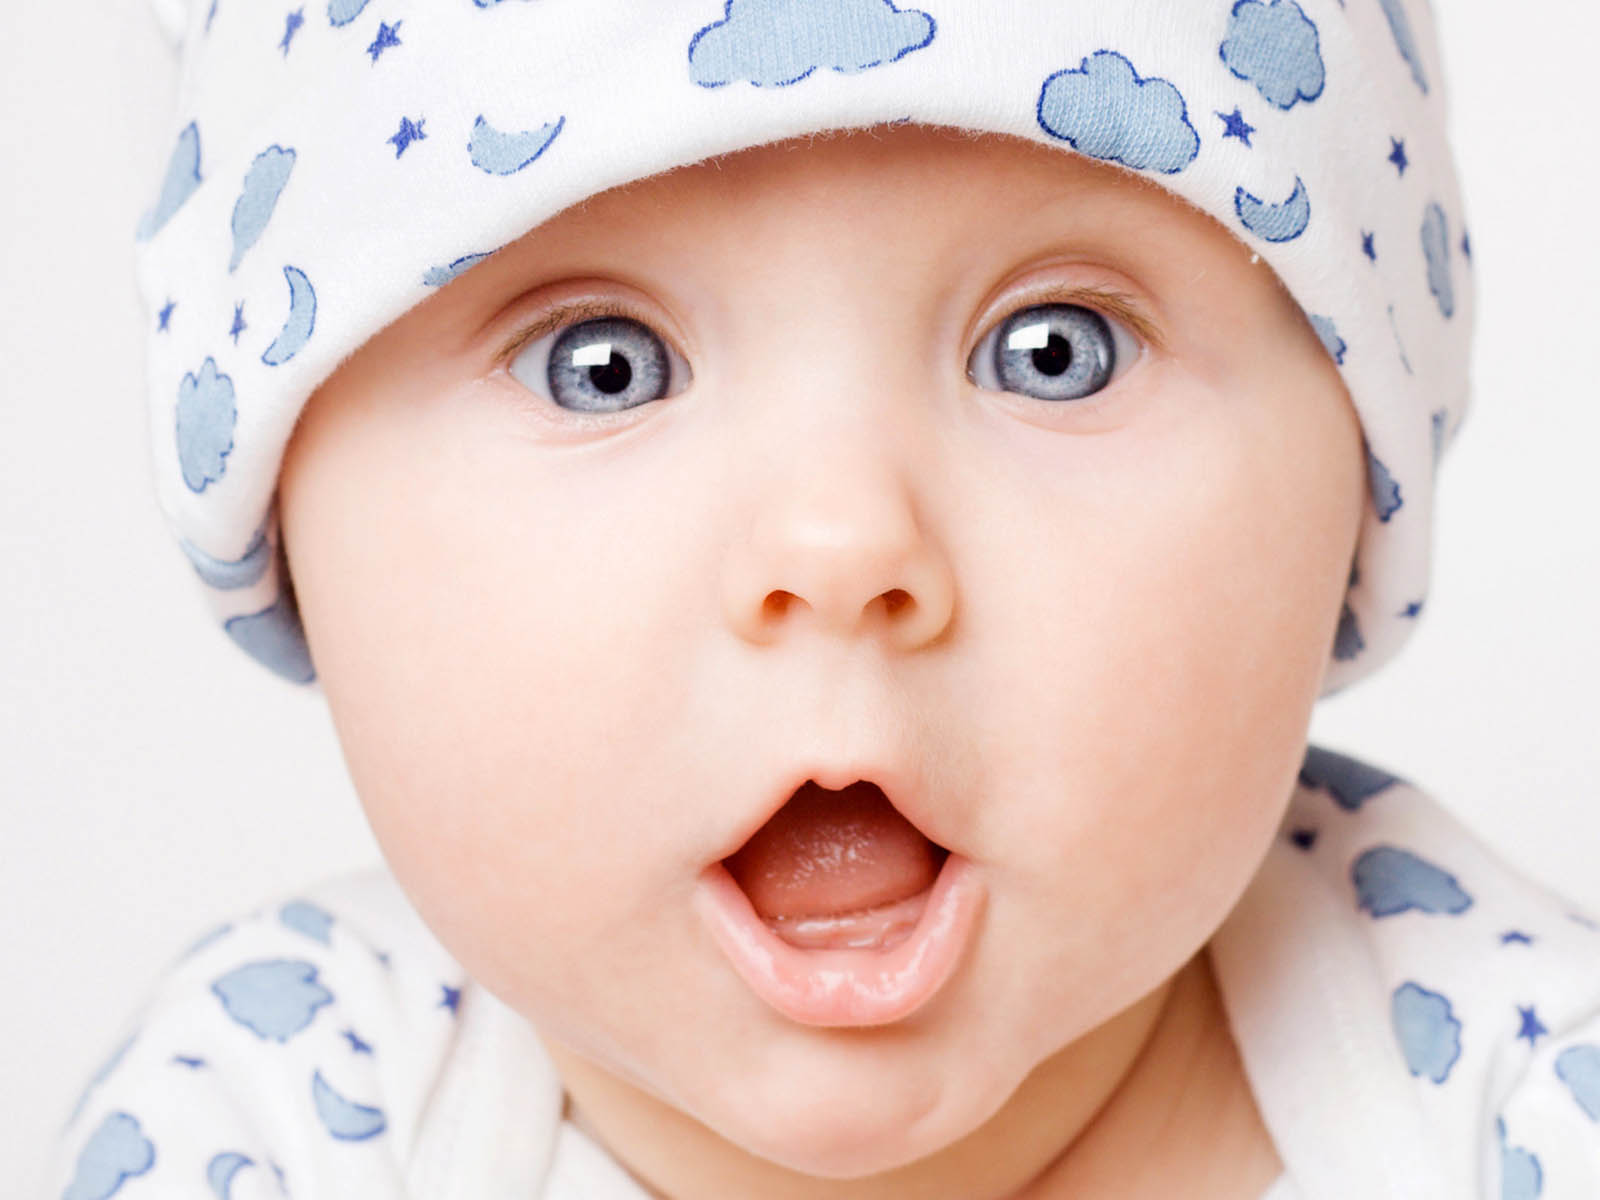 Tag Funny Babies Wallpaper Image Photos Pictures And Background